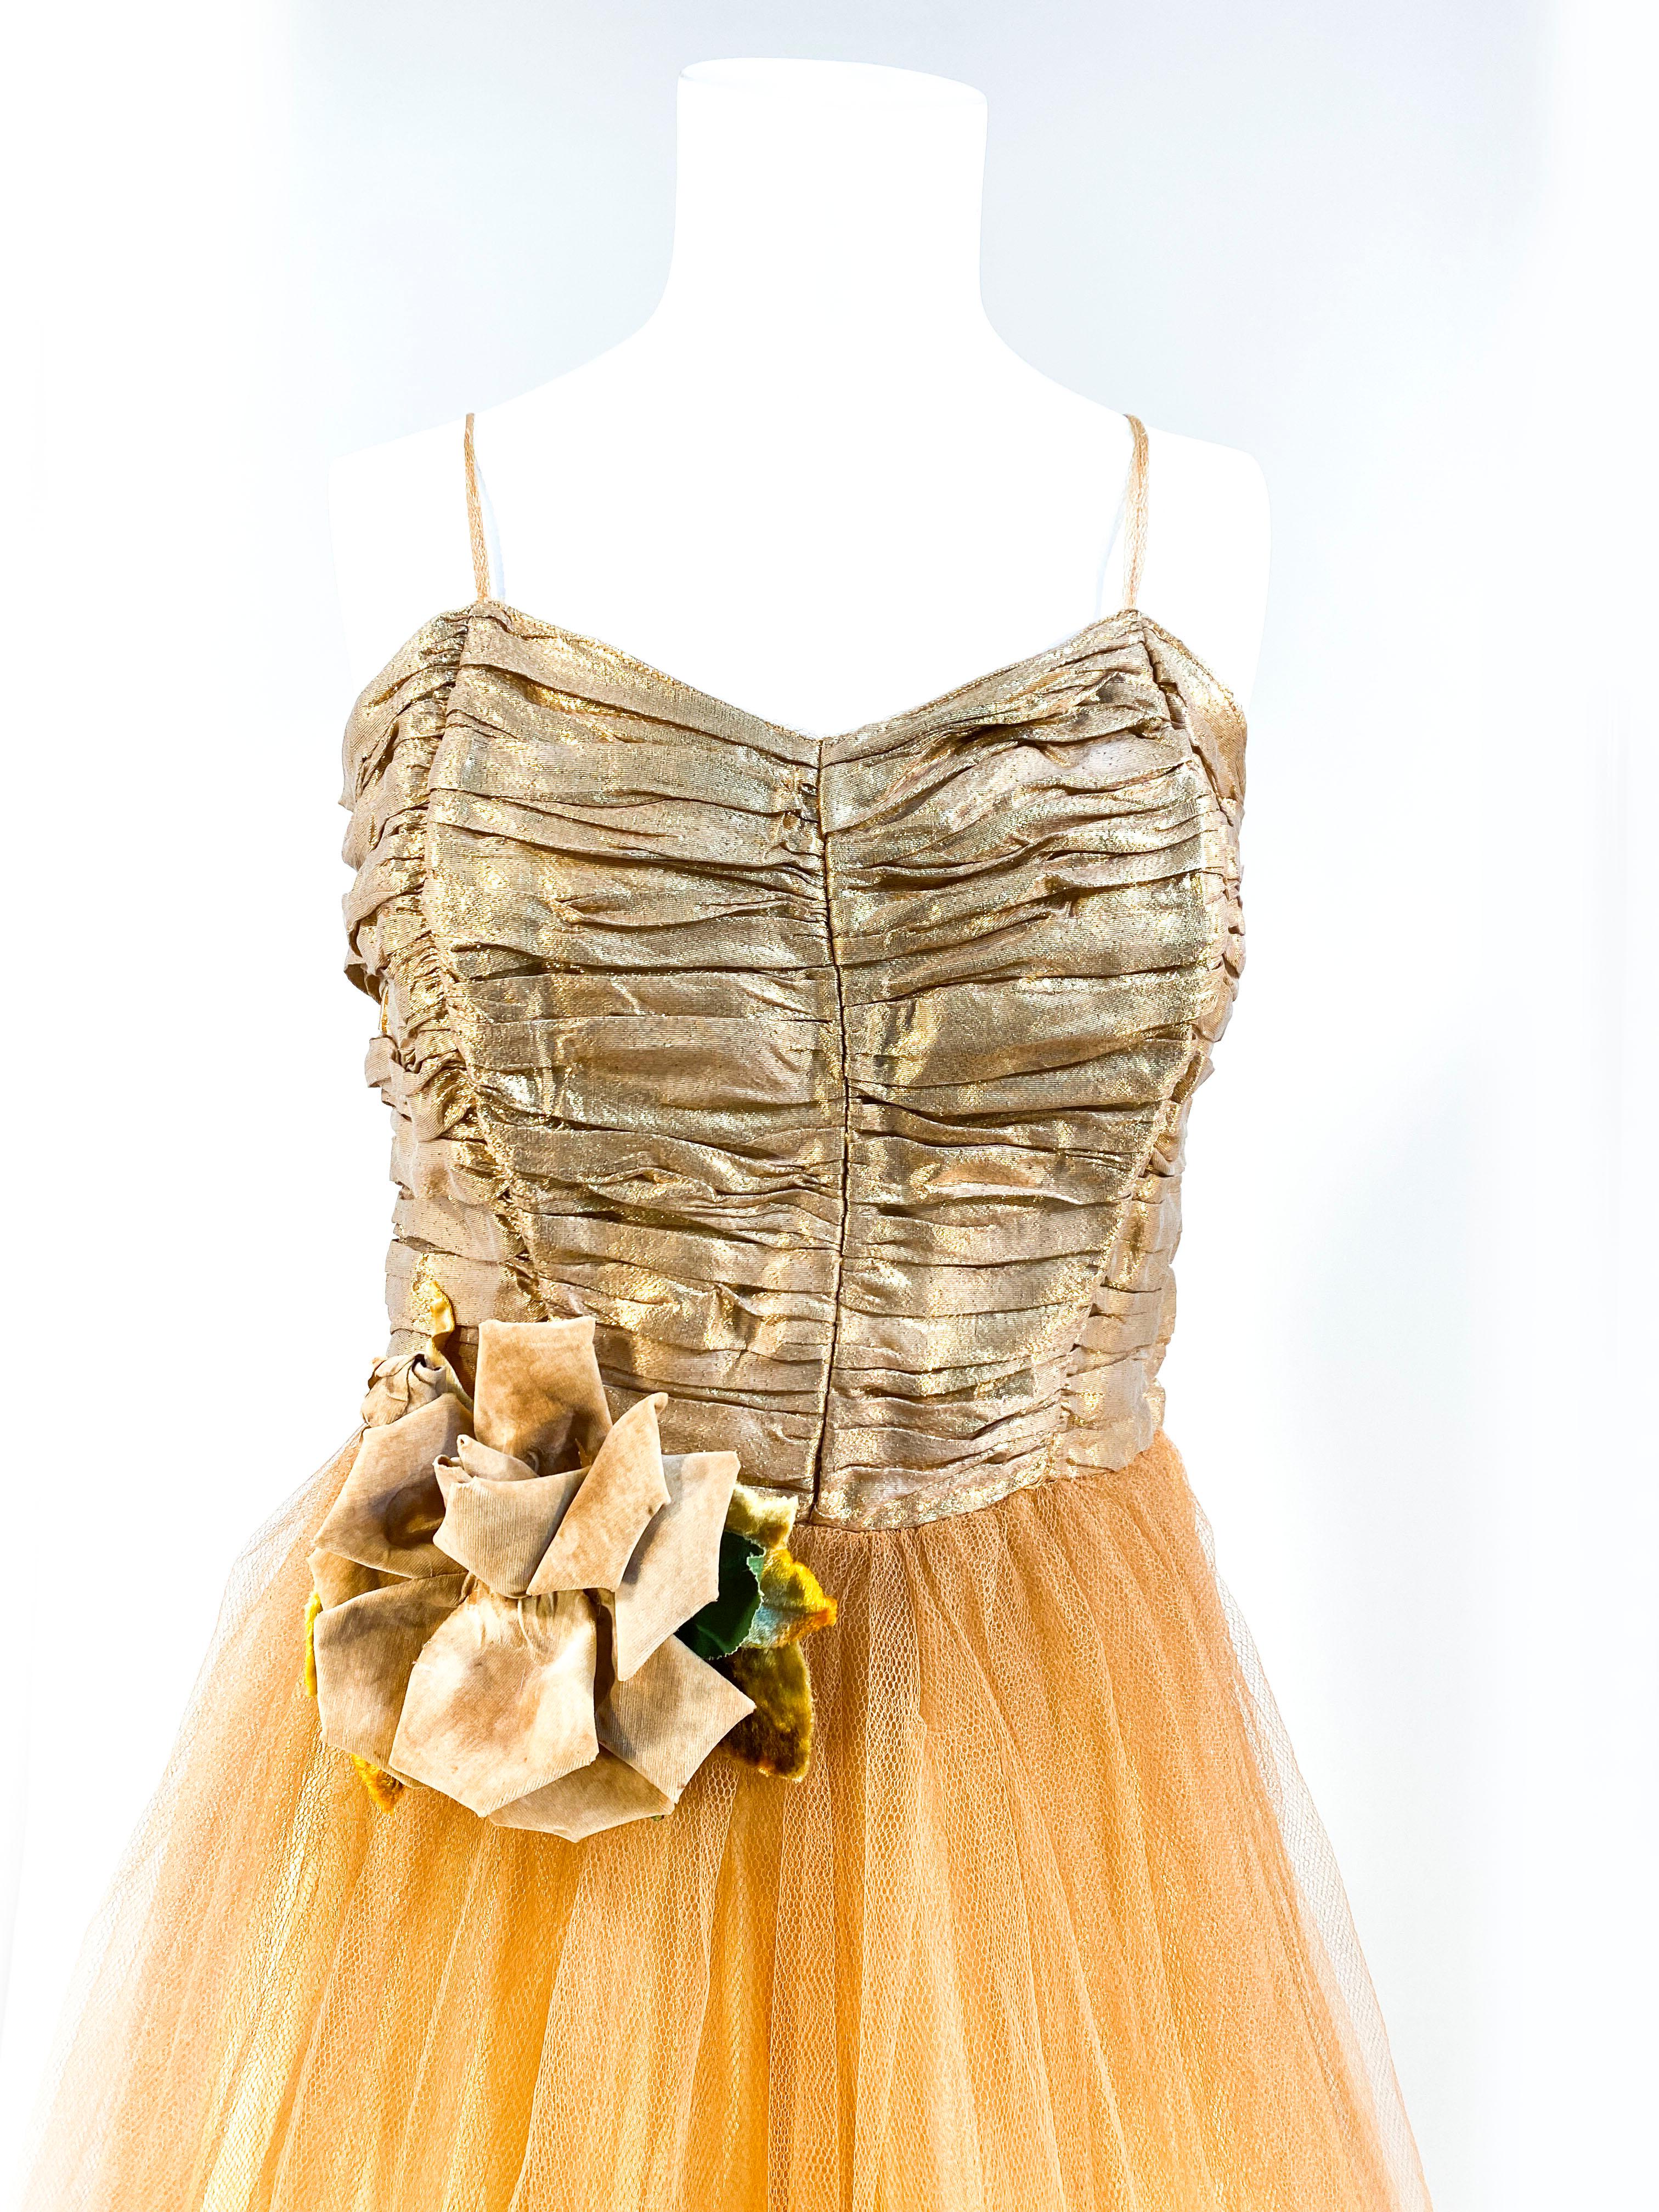 1950s tea-length party dress with gold metallic lamé ruched bodice. The skirt is made of gold layered tulle that is finished with a handmade gold enlarged rose with buds and leaves. The dress is entirely lined with boning in the bodice for